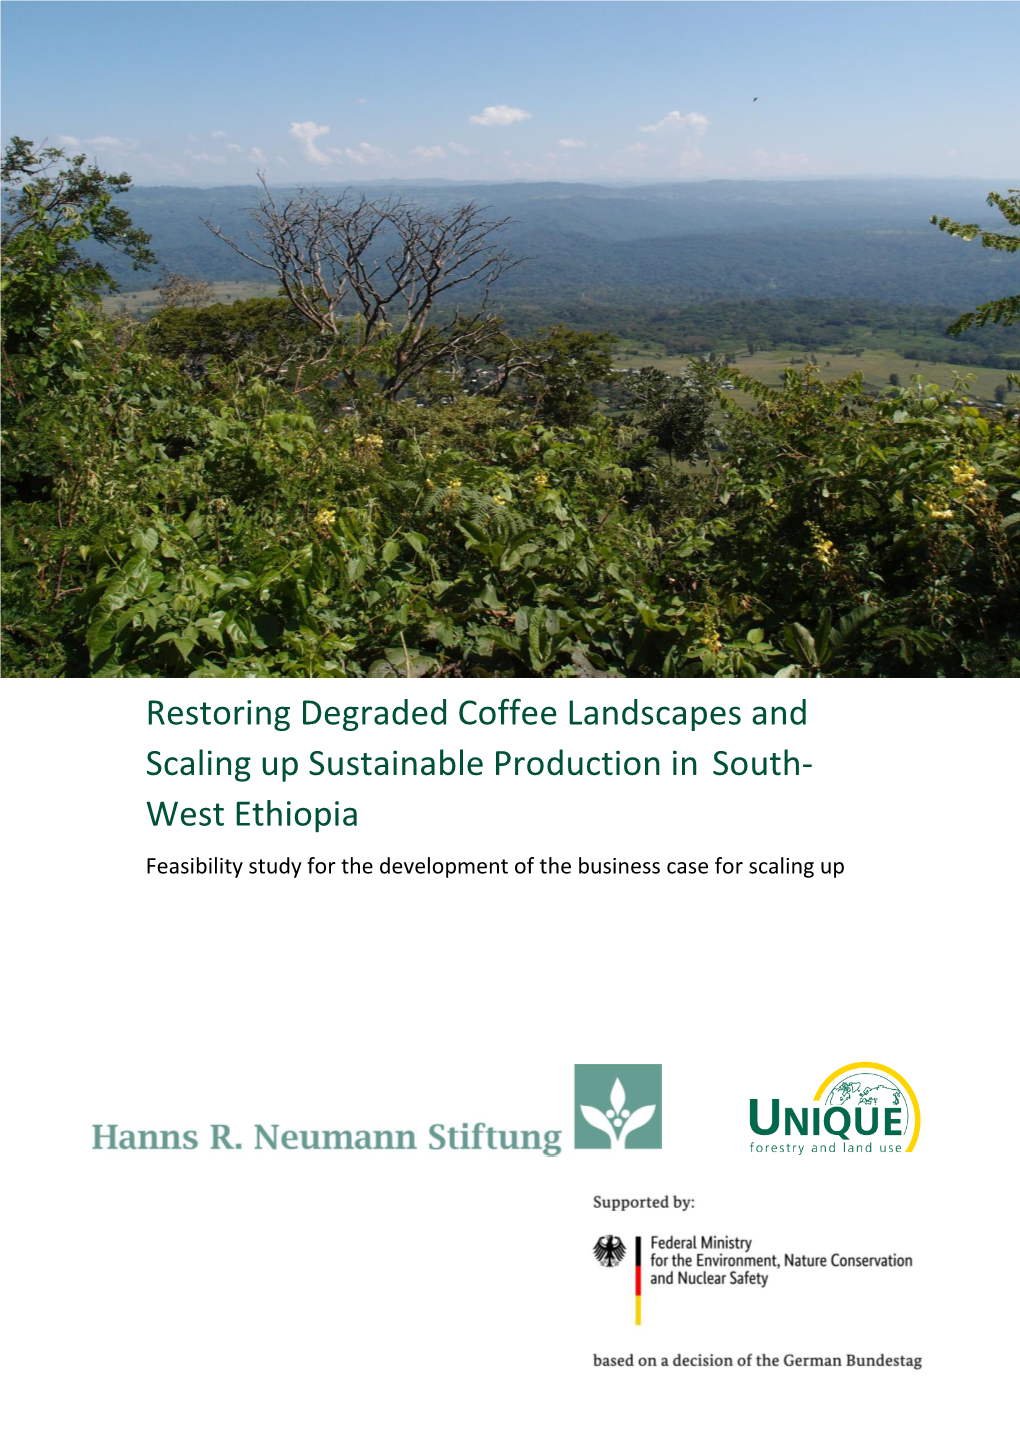 Restoring Degraded Coffee Landscapes and Scaling Up